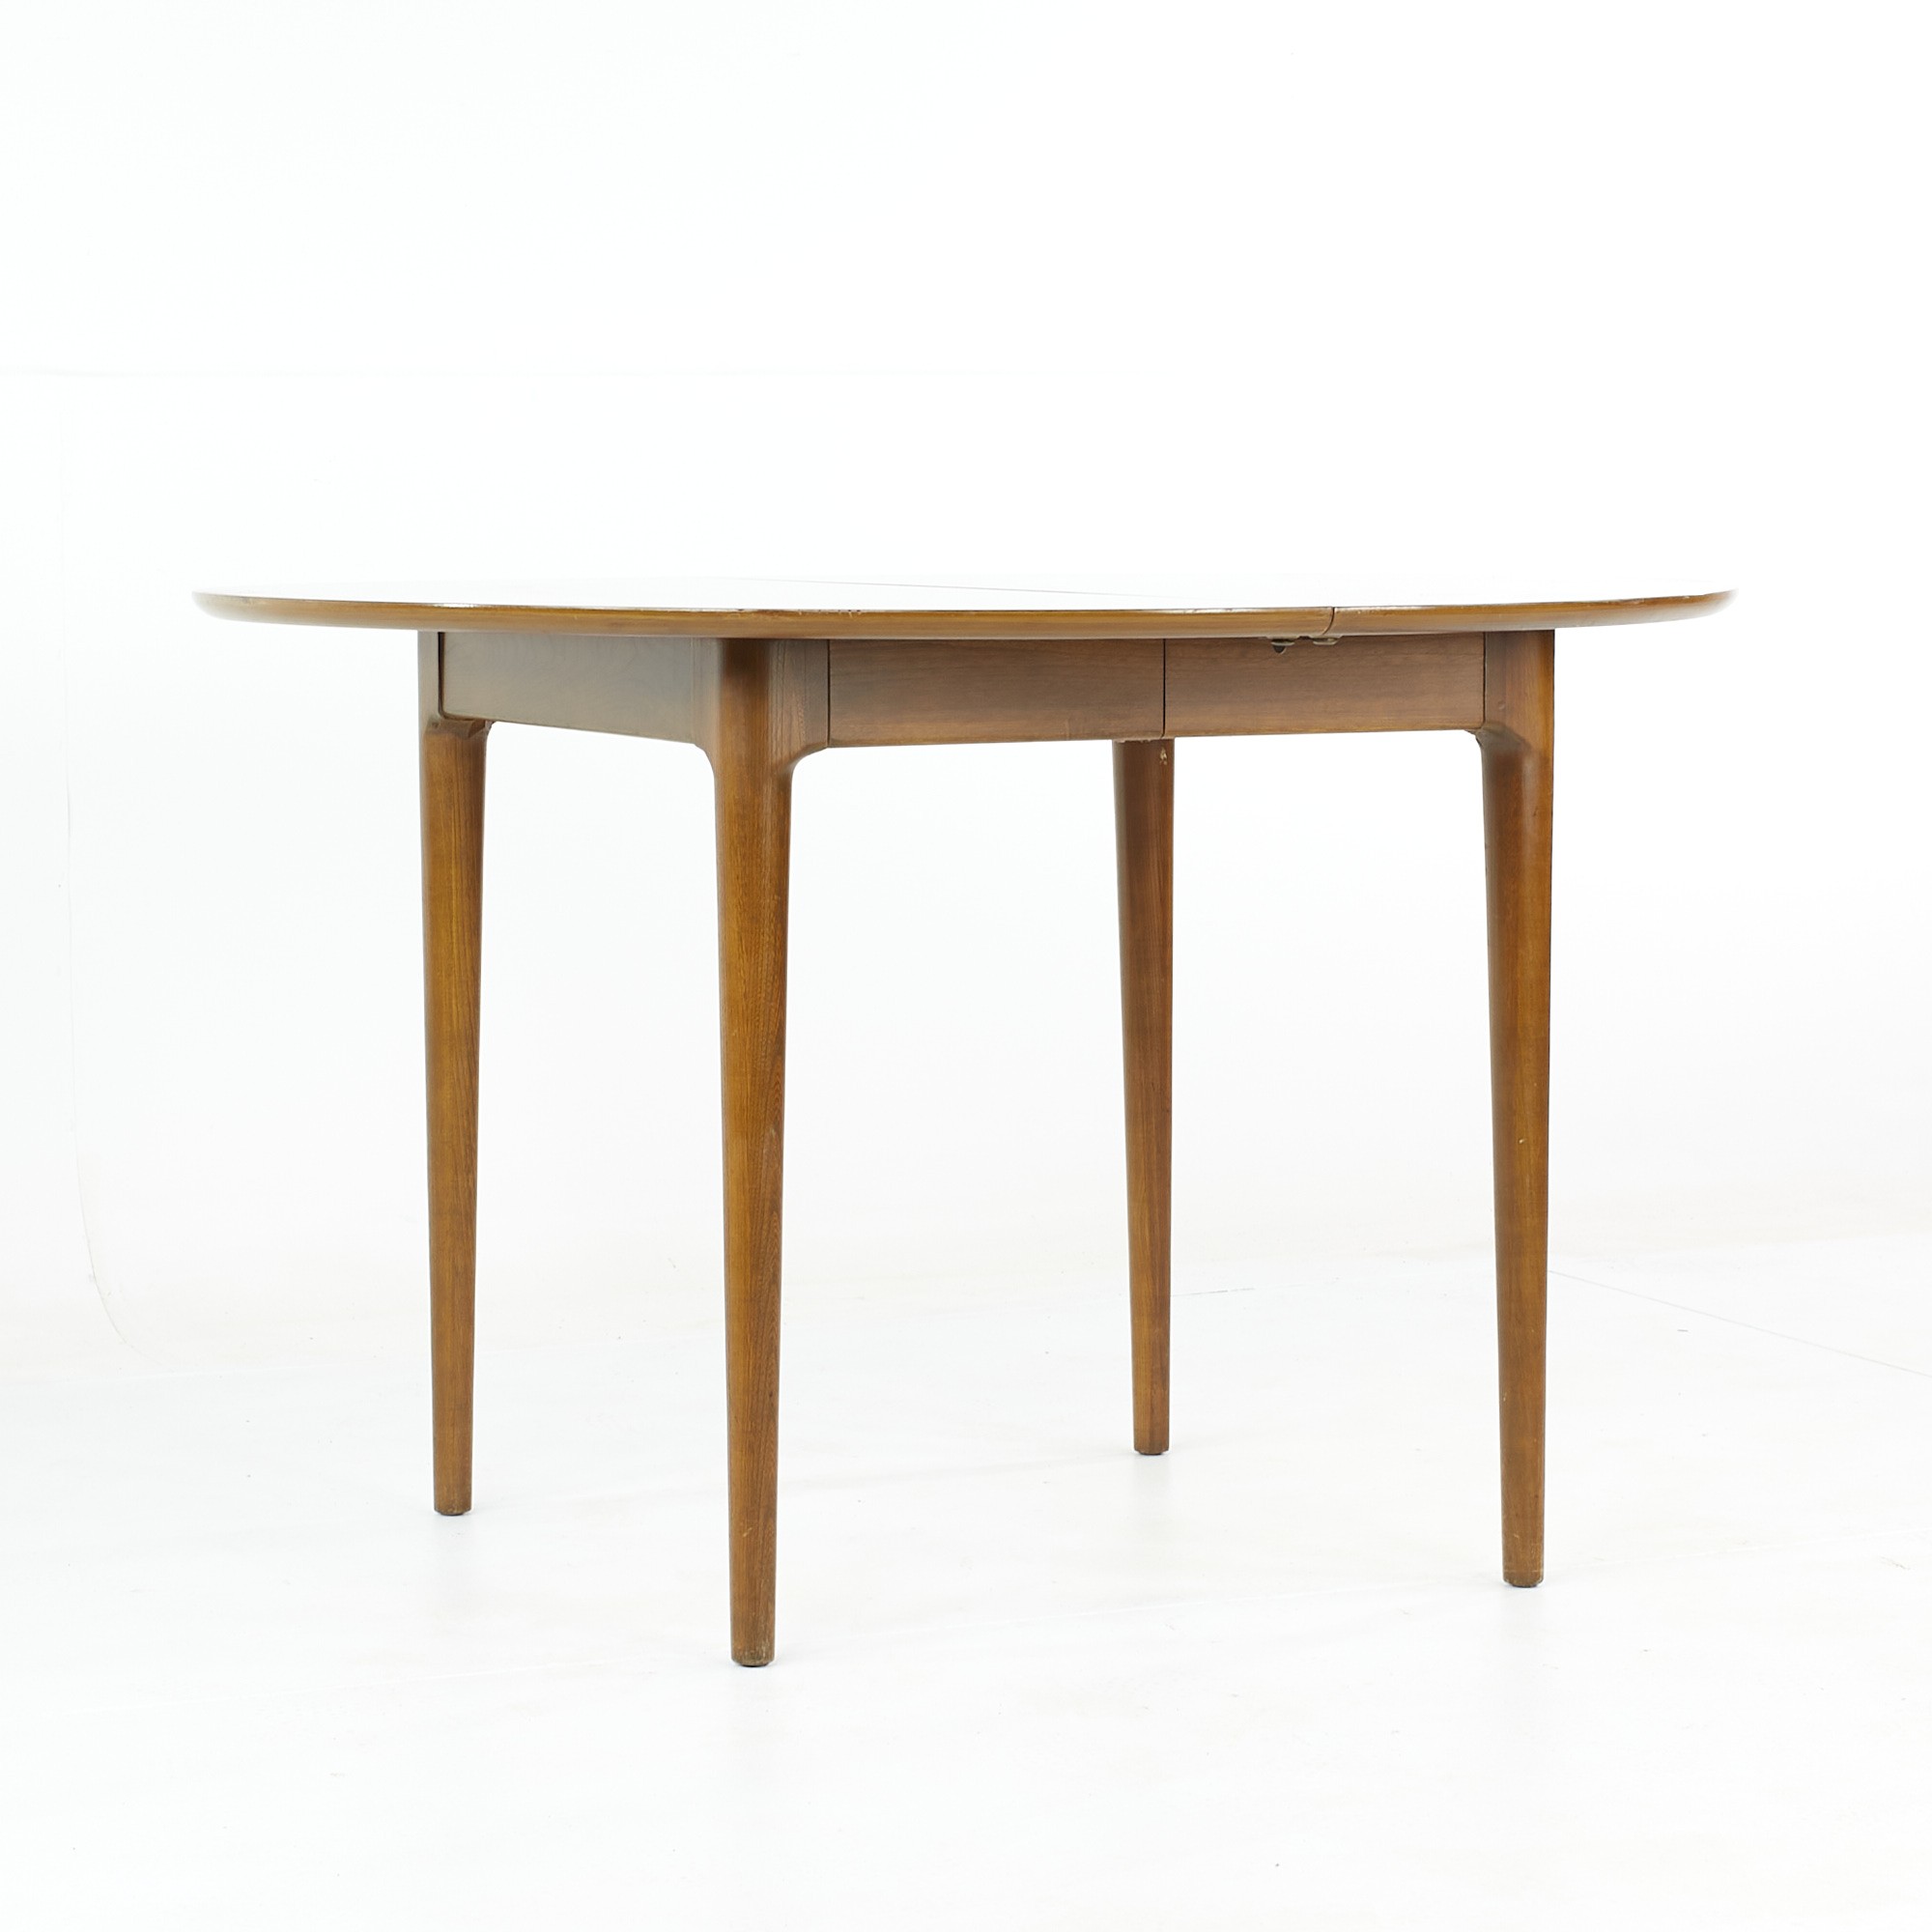 Lawrence Peabody Mid Century Walnut Dining Table with 2 Leaves